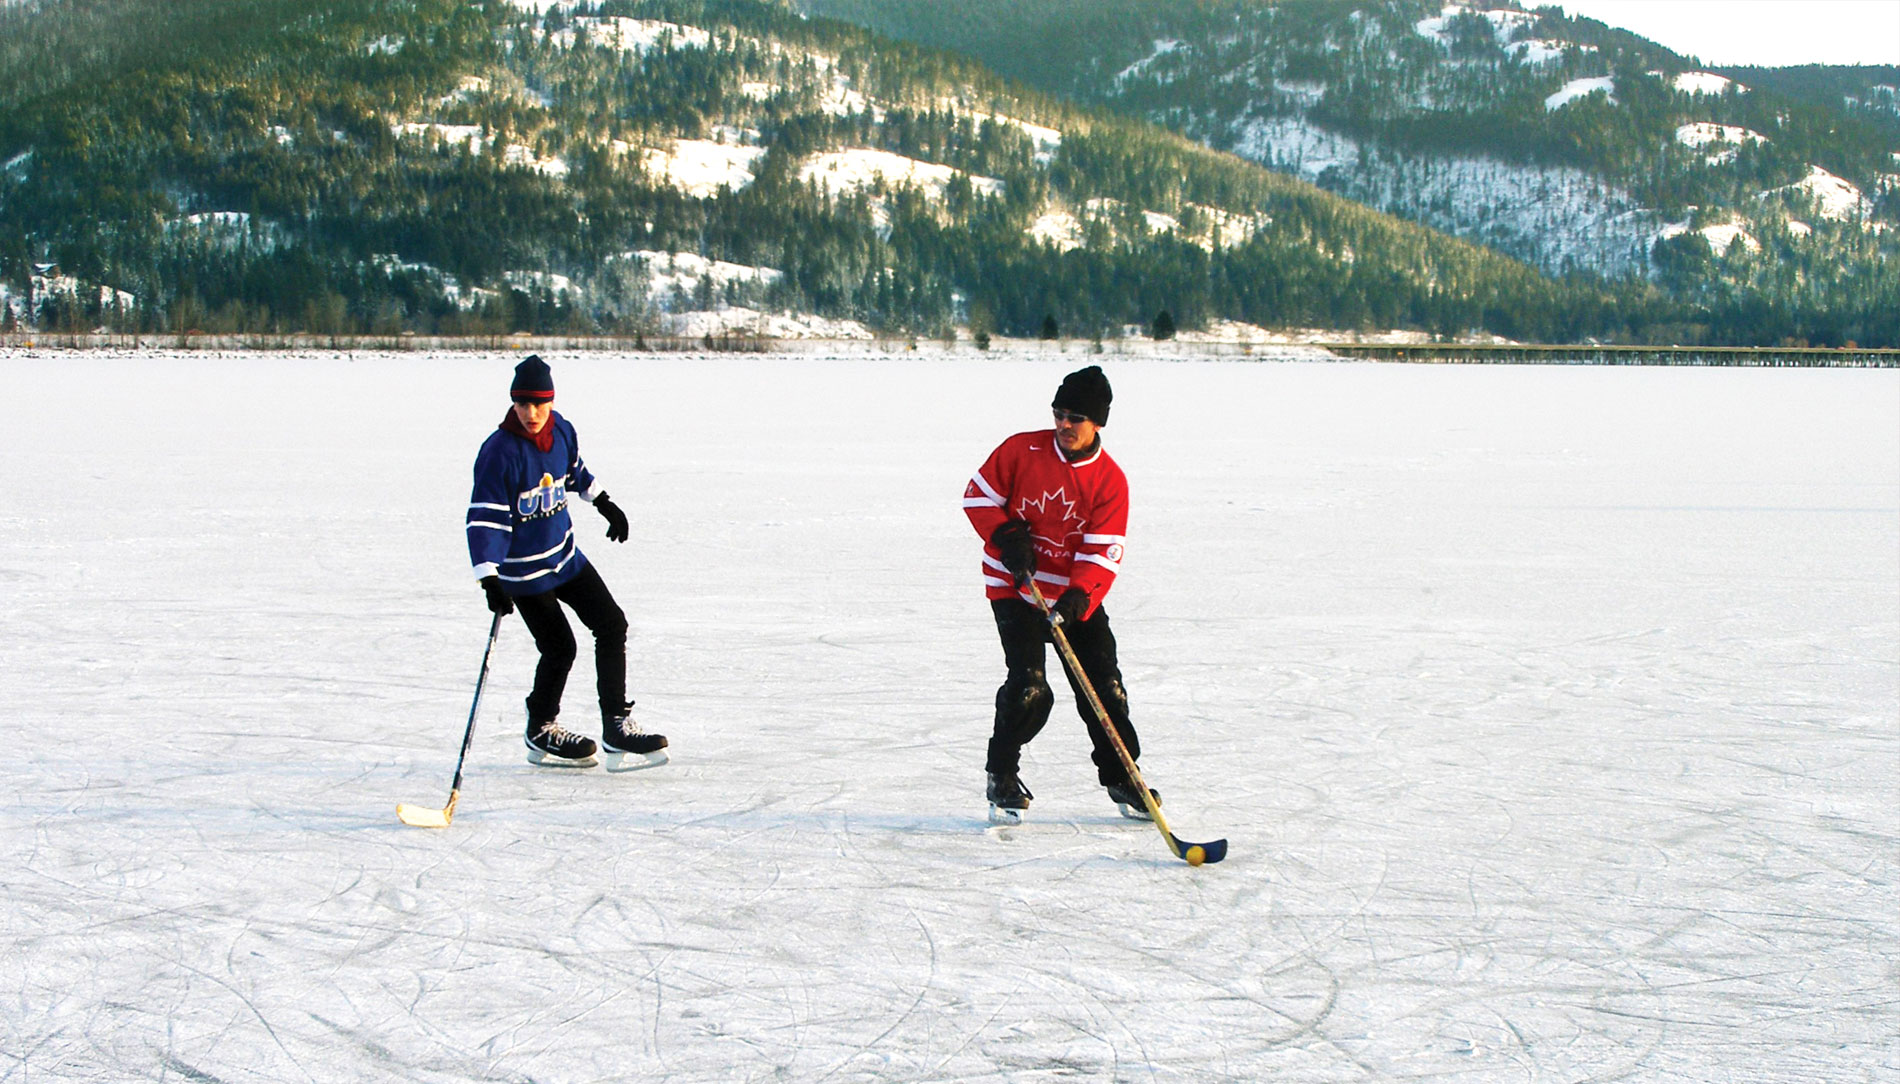 Ice skaters play hockey on frozen waters in Northern Idaho